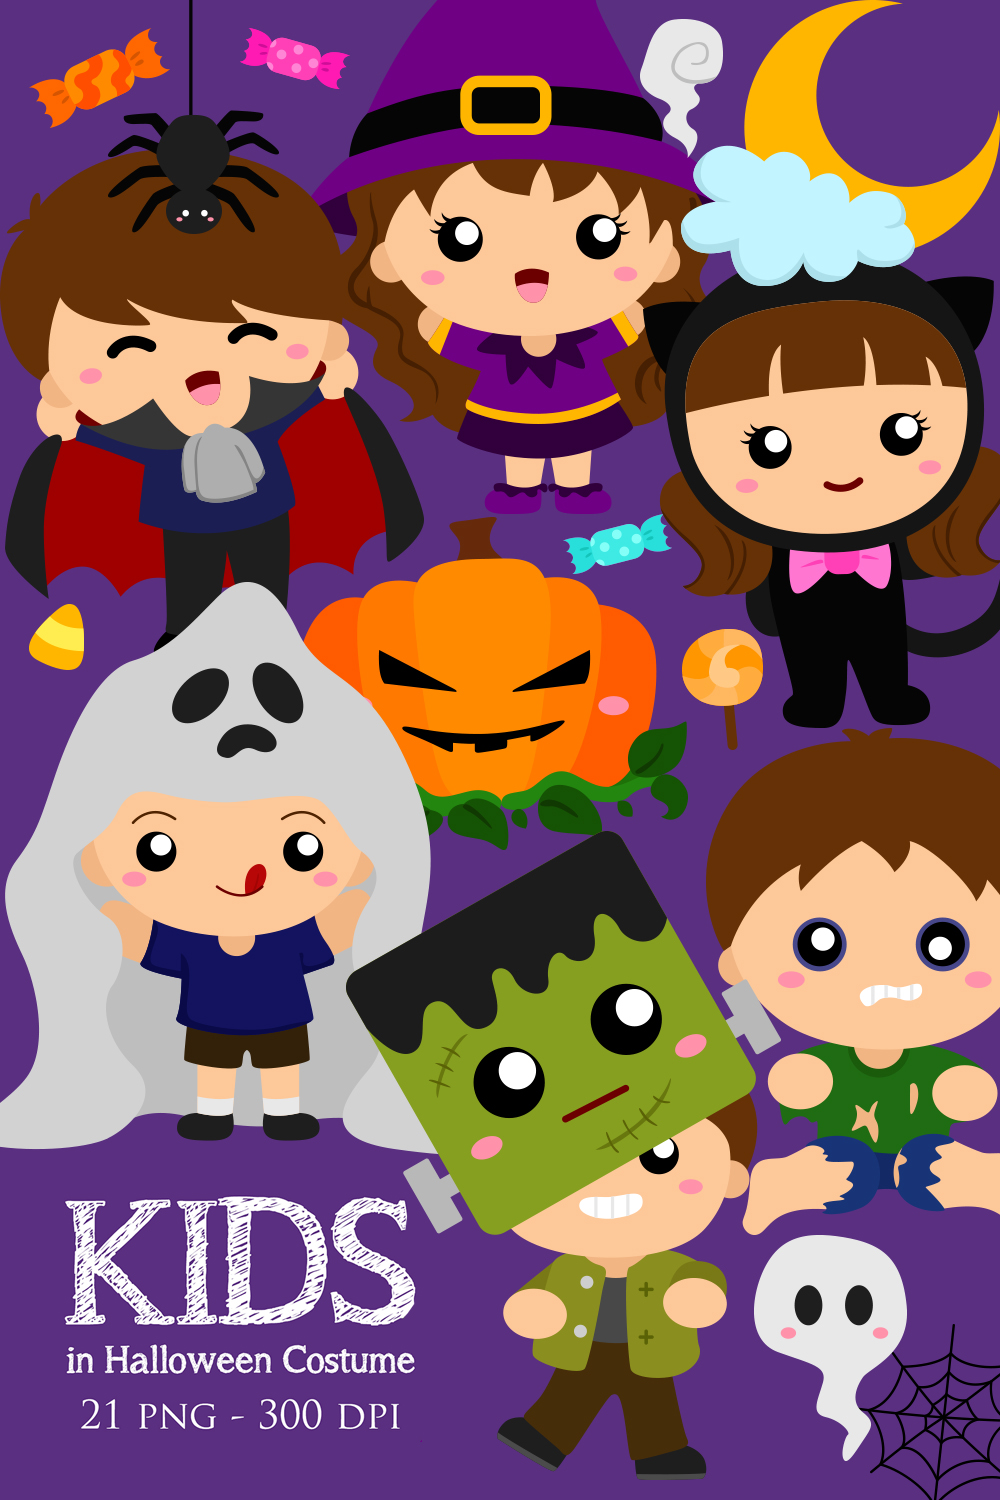 Kids and Halloween October Costume Party Ghost Witch Frakenstein Cat Vampire Dark Night Decoration Illustration Vector Clipart Cartoon pinterest preview image.